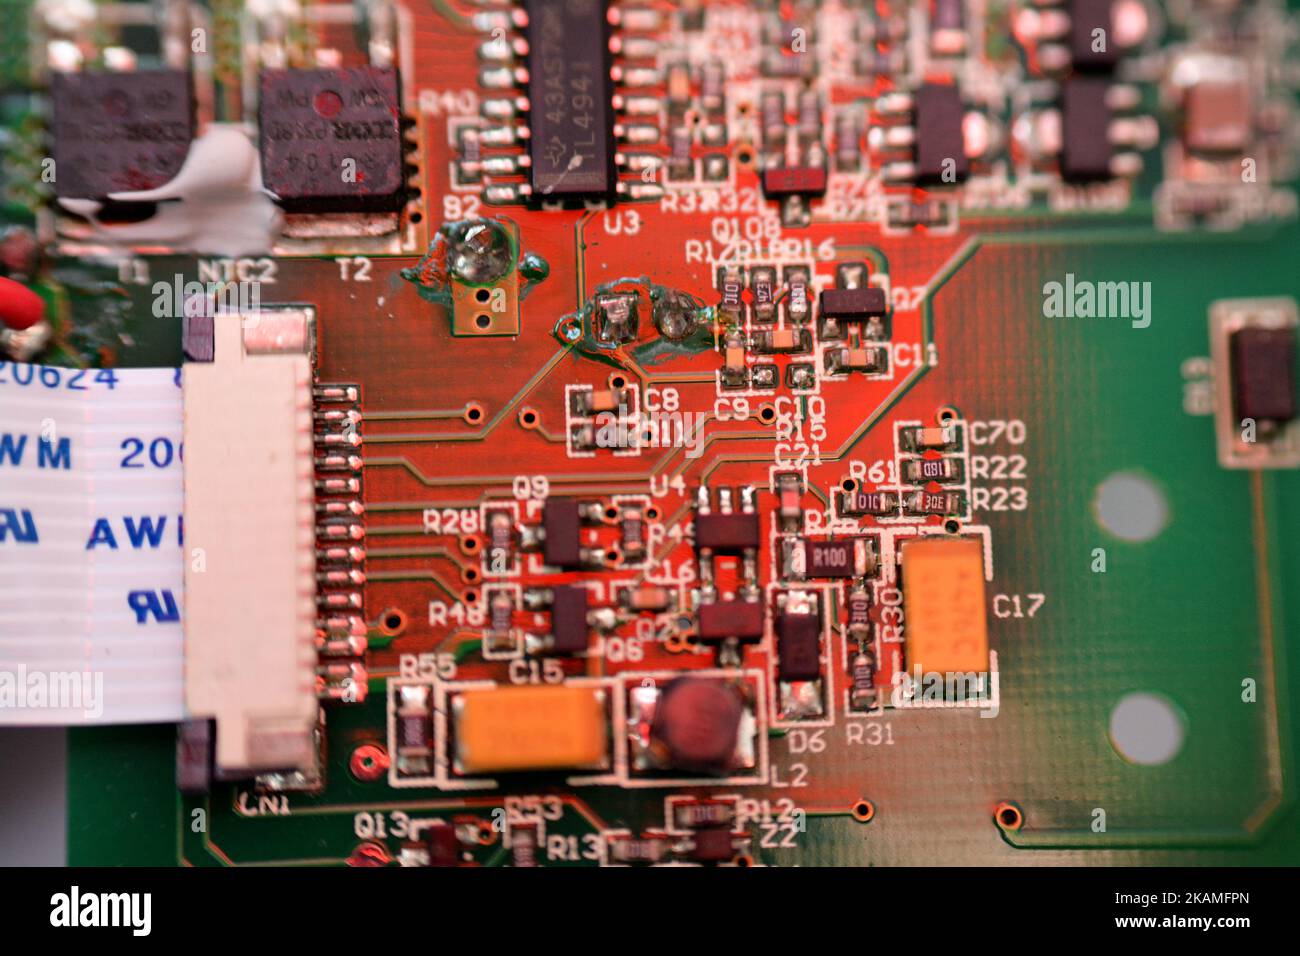 Cairo, Egypt, October 13 2022: A printed circuit board PCB, printed wiring board PWB, a medium used in electrical and electronic engineering to connec Stock Photo